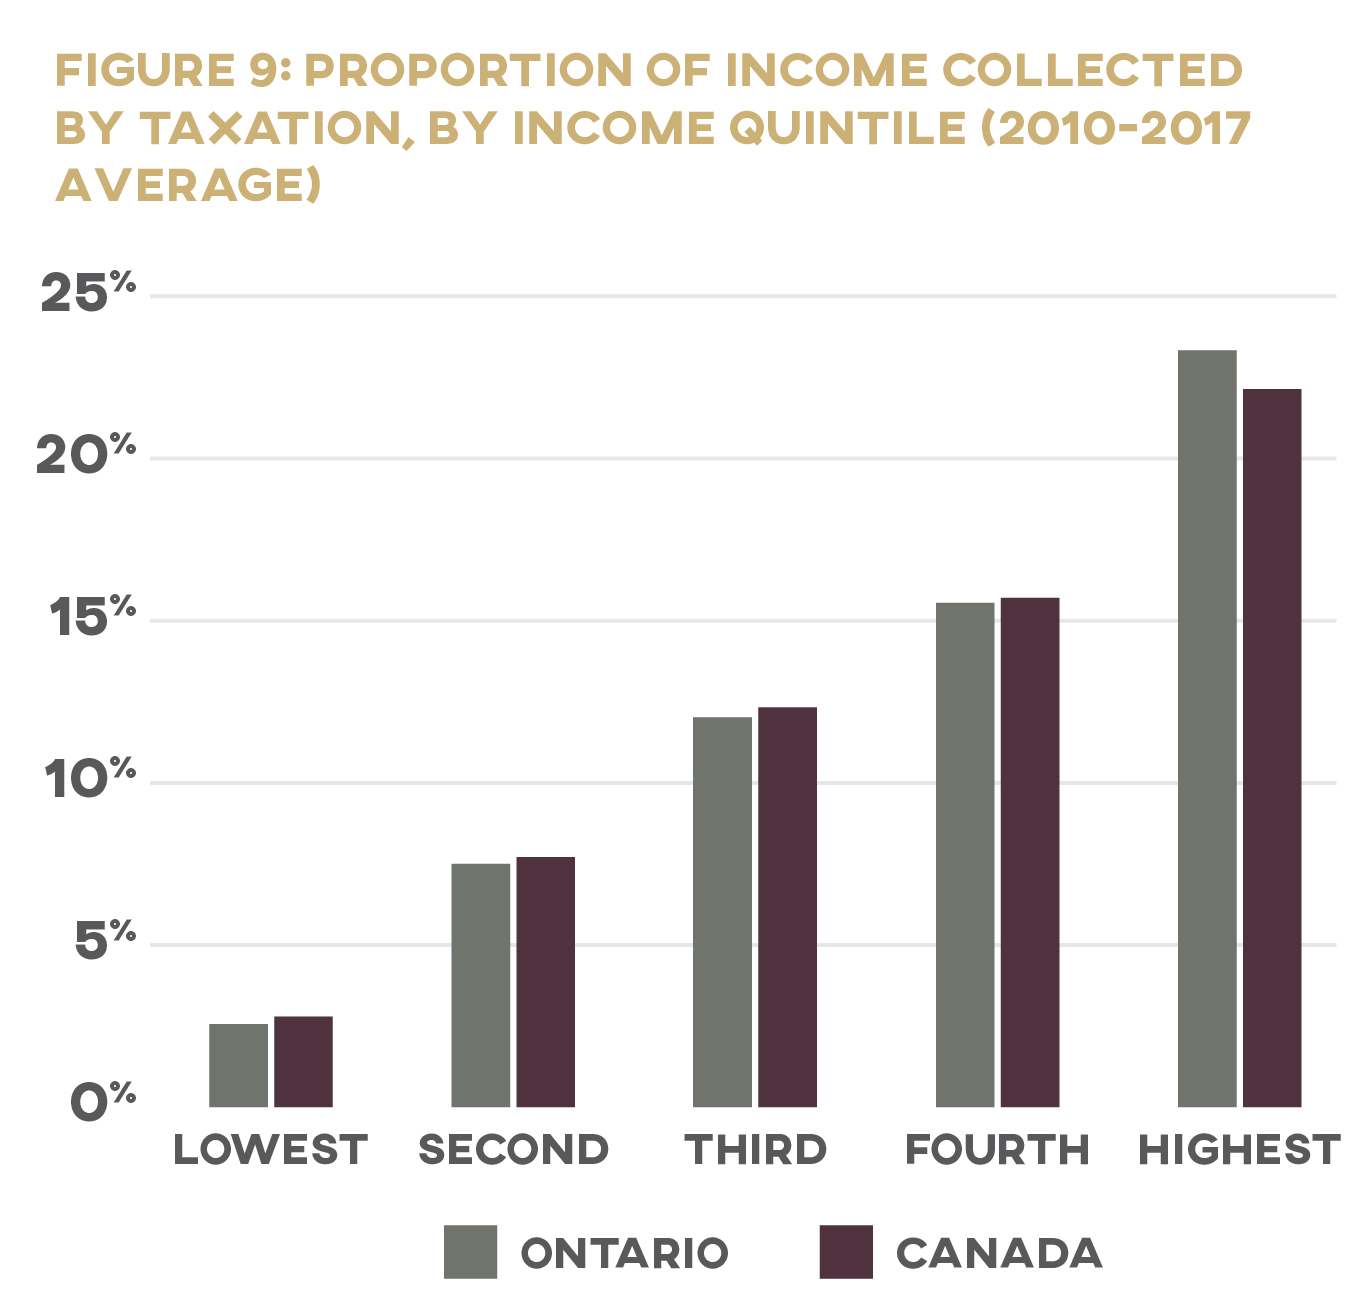 Figure 9: Proportion of Income Collected by Taxation, By Income Quintile (2010-2017 Average)